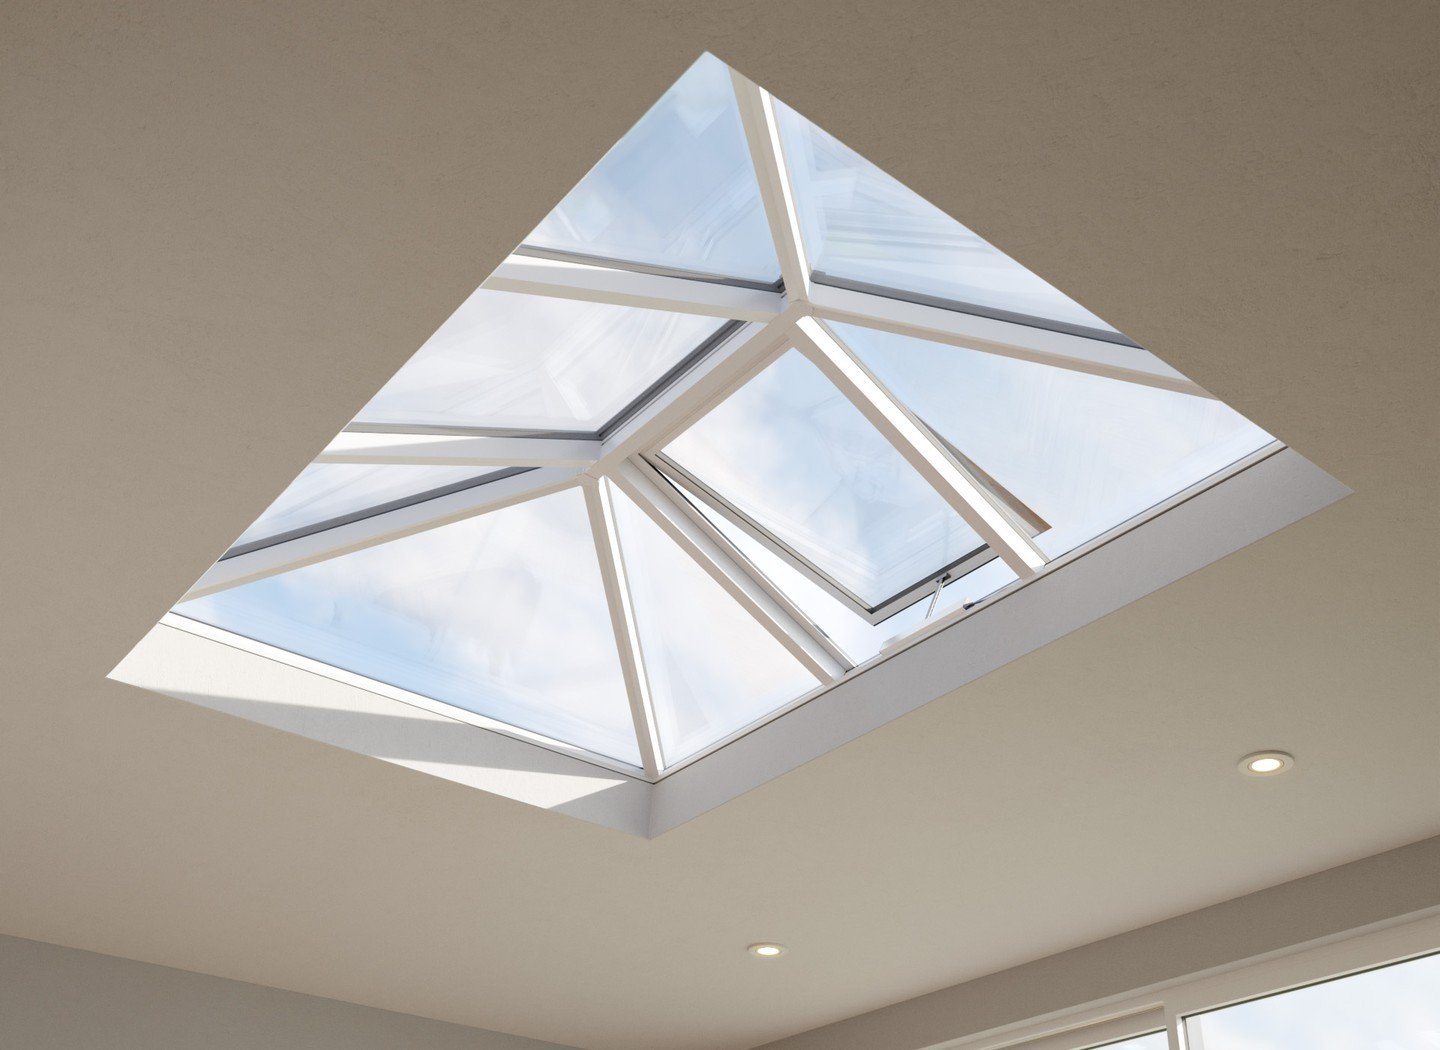 Increase ventilation and natural light with our roof lanterns!

With a minimalist design that sits flush with the rafter bars, this vent is perfect for any project.

Our roof lantern uses powered actuators to automatically open the vent, offering rel